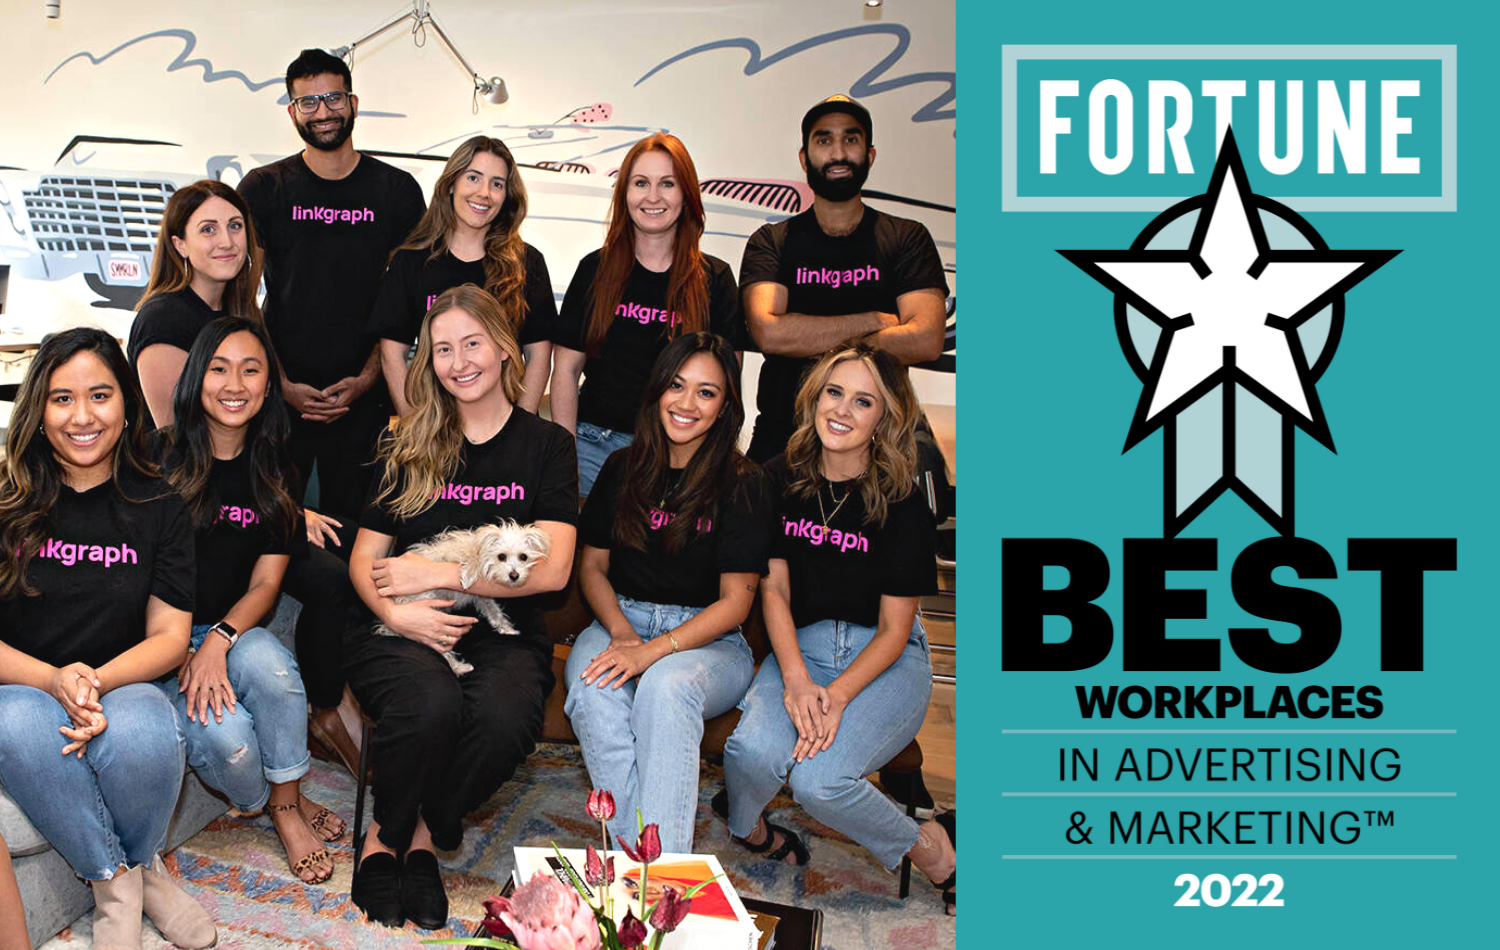 2019 was a significant year for LinkGraph as they were recognized by Fortune as one of the best workplaces in advertising & marketing. With their commitment to excellence and innovation, LinkGraph continues to provide a